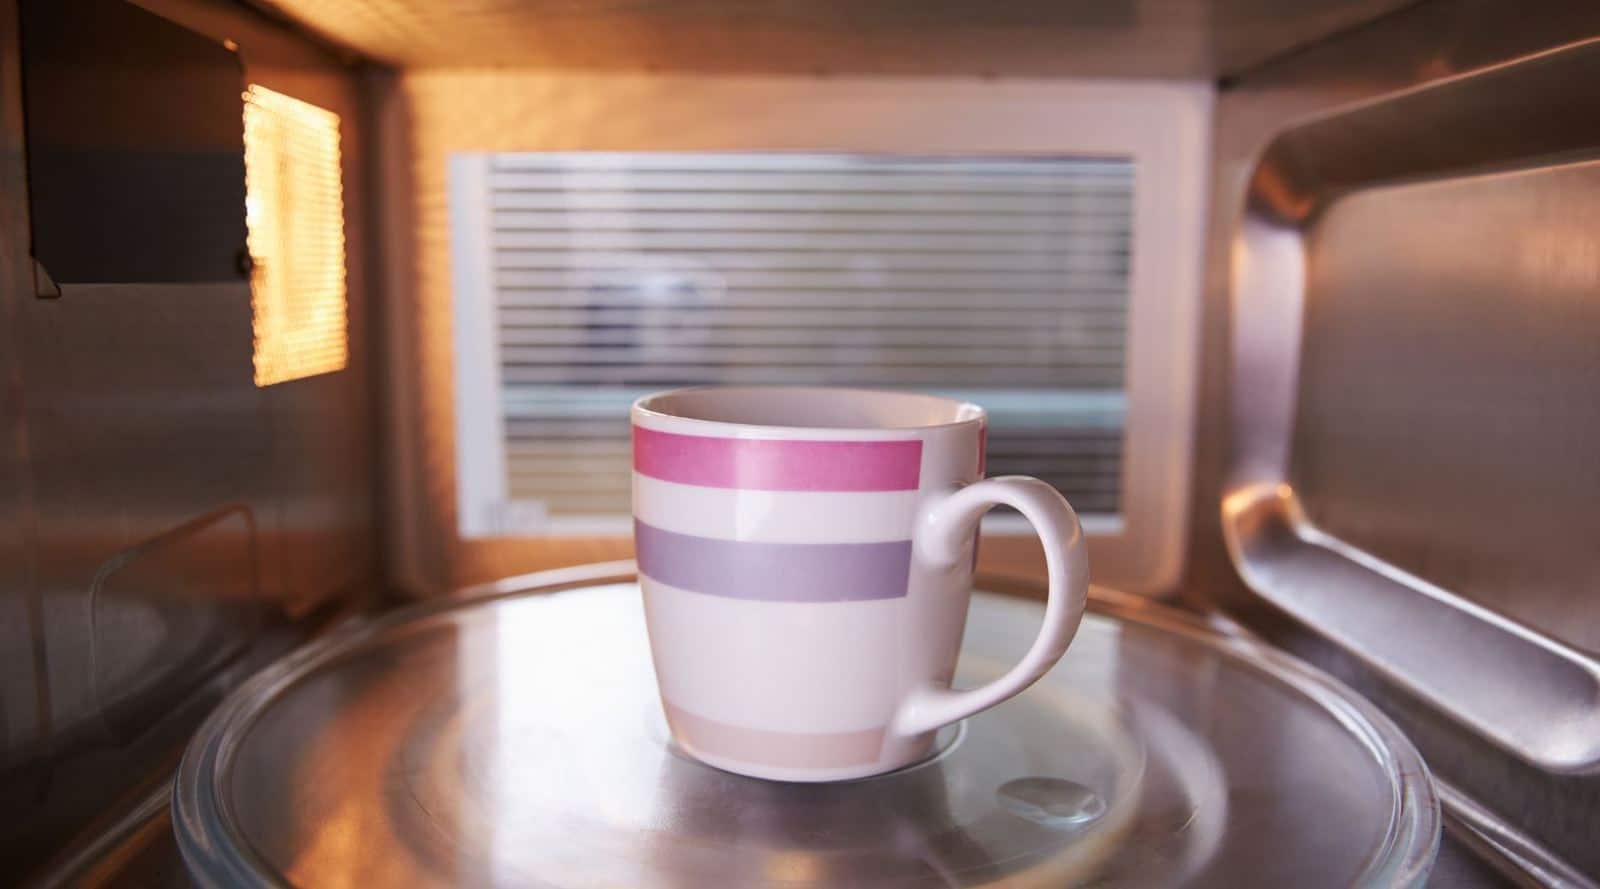 is it safe to microwave water for tea?